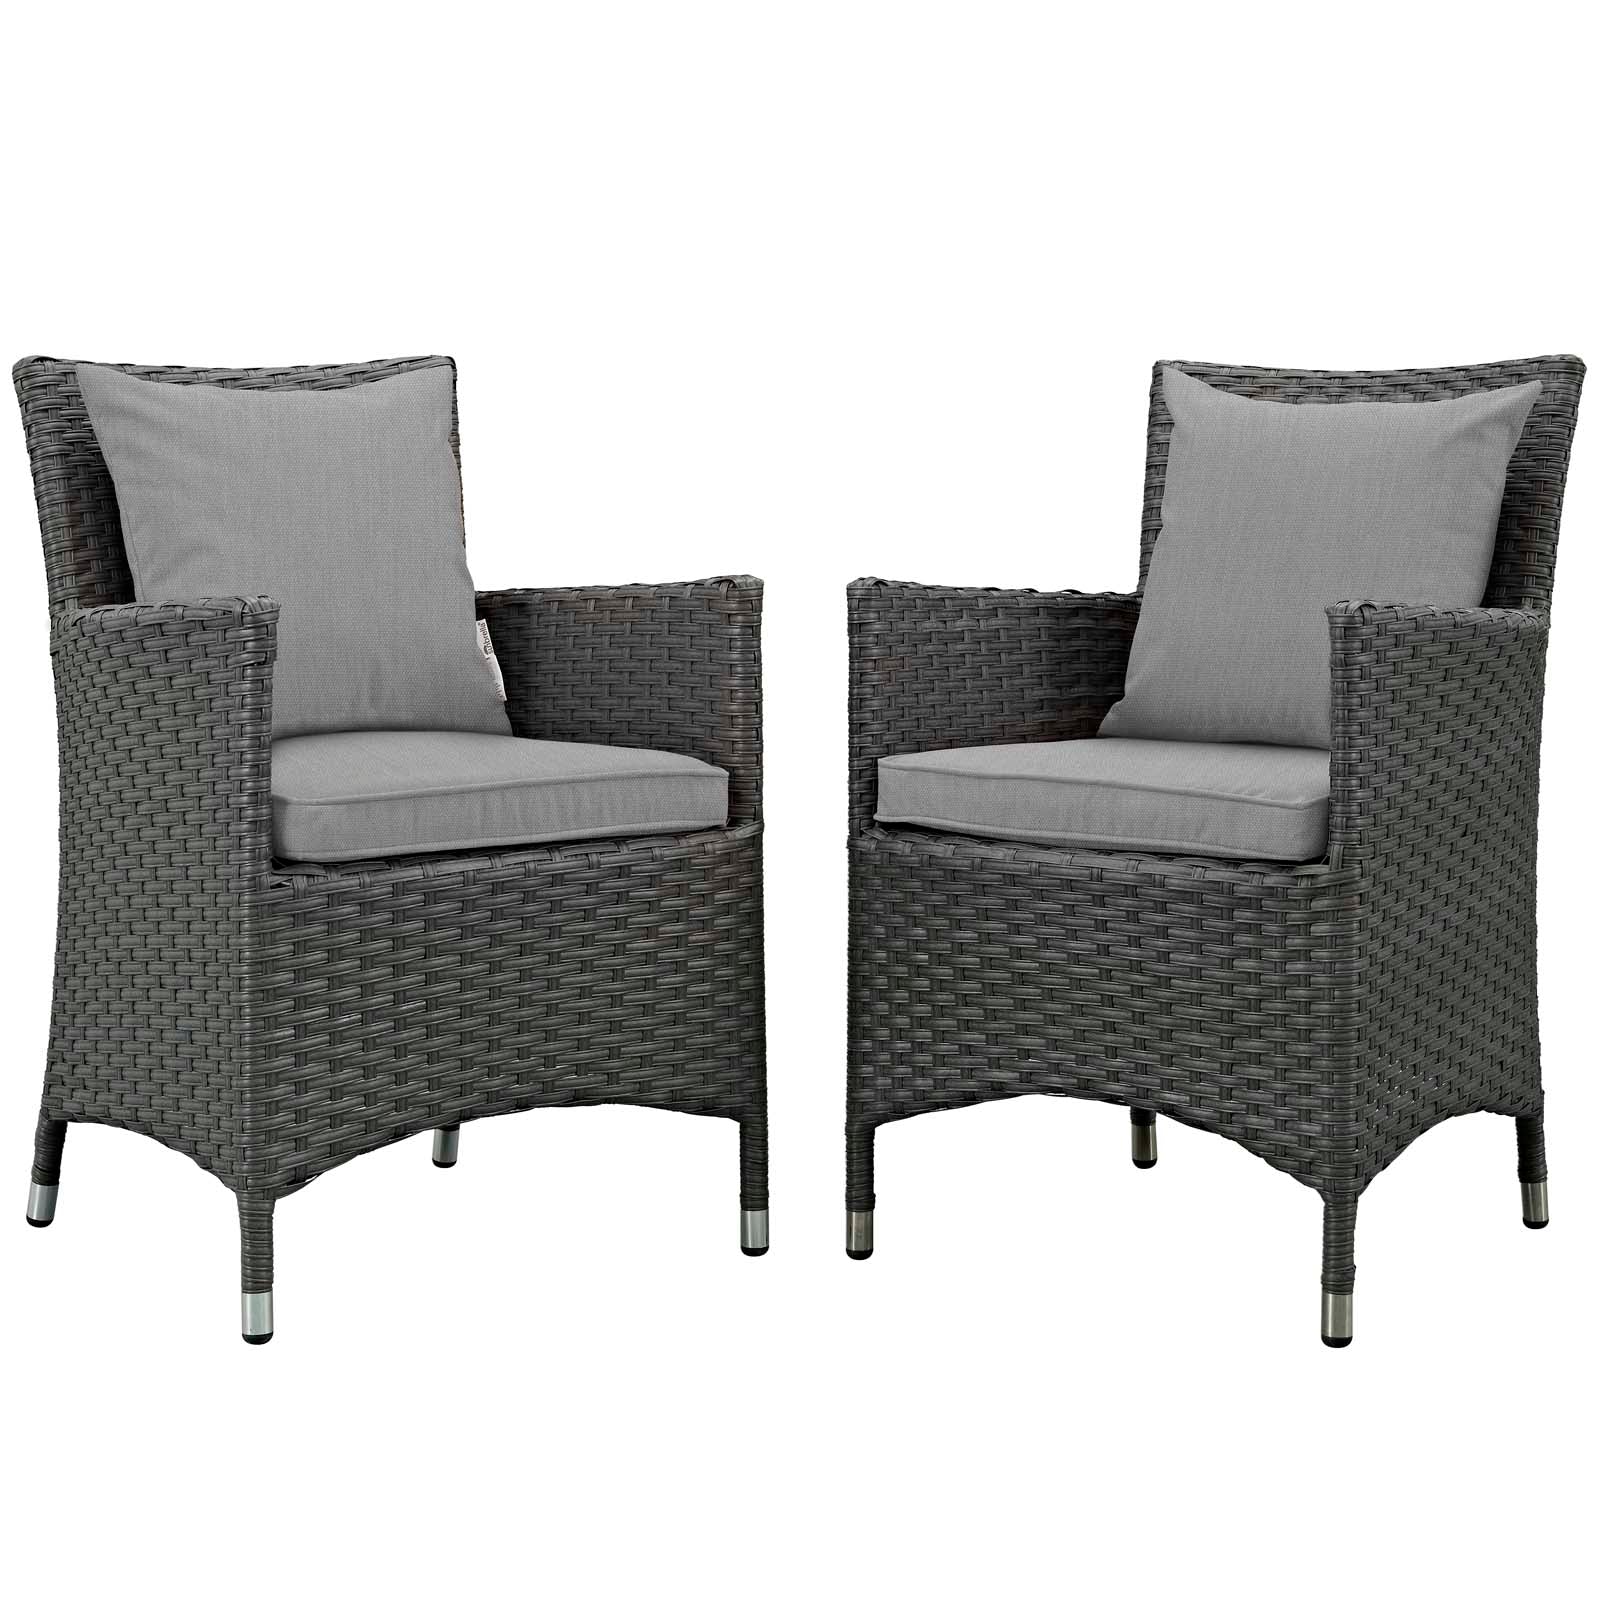 Modway Outdoor Dining Sets - Sojourn 2 Piece Outdoor Patio Sunbrella Dining Set Canvas Gray